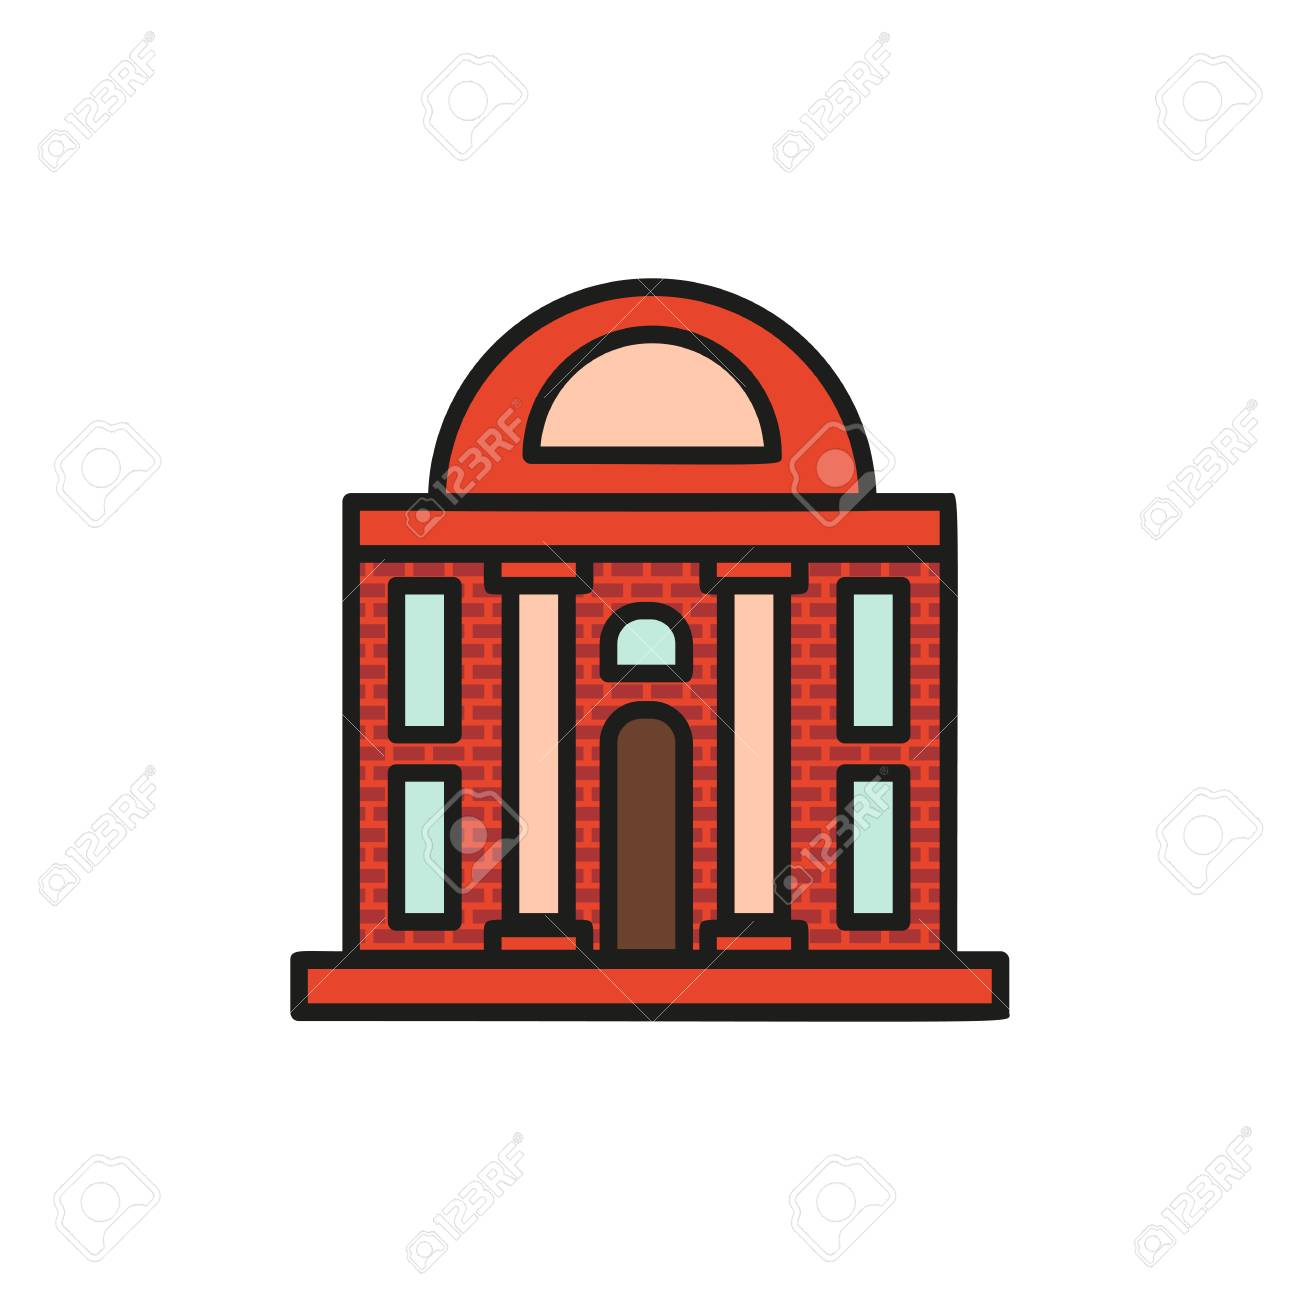 Thin line municipal services icons Royalty Free Vector Image